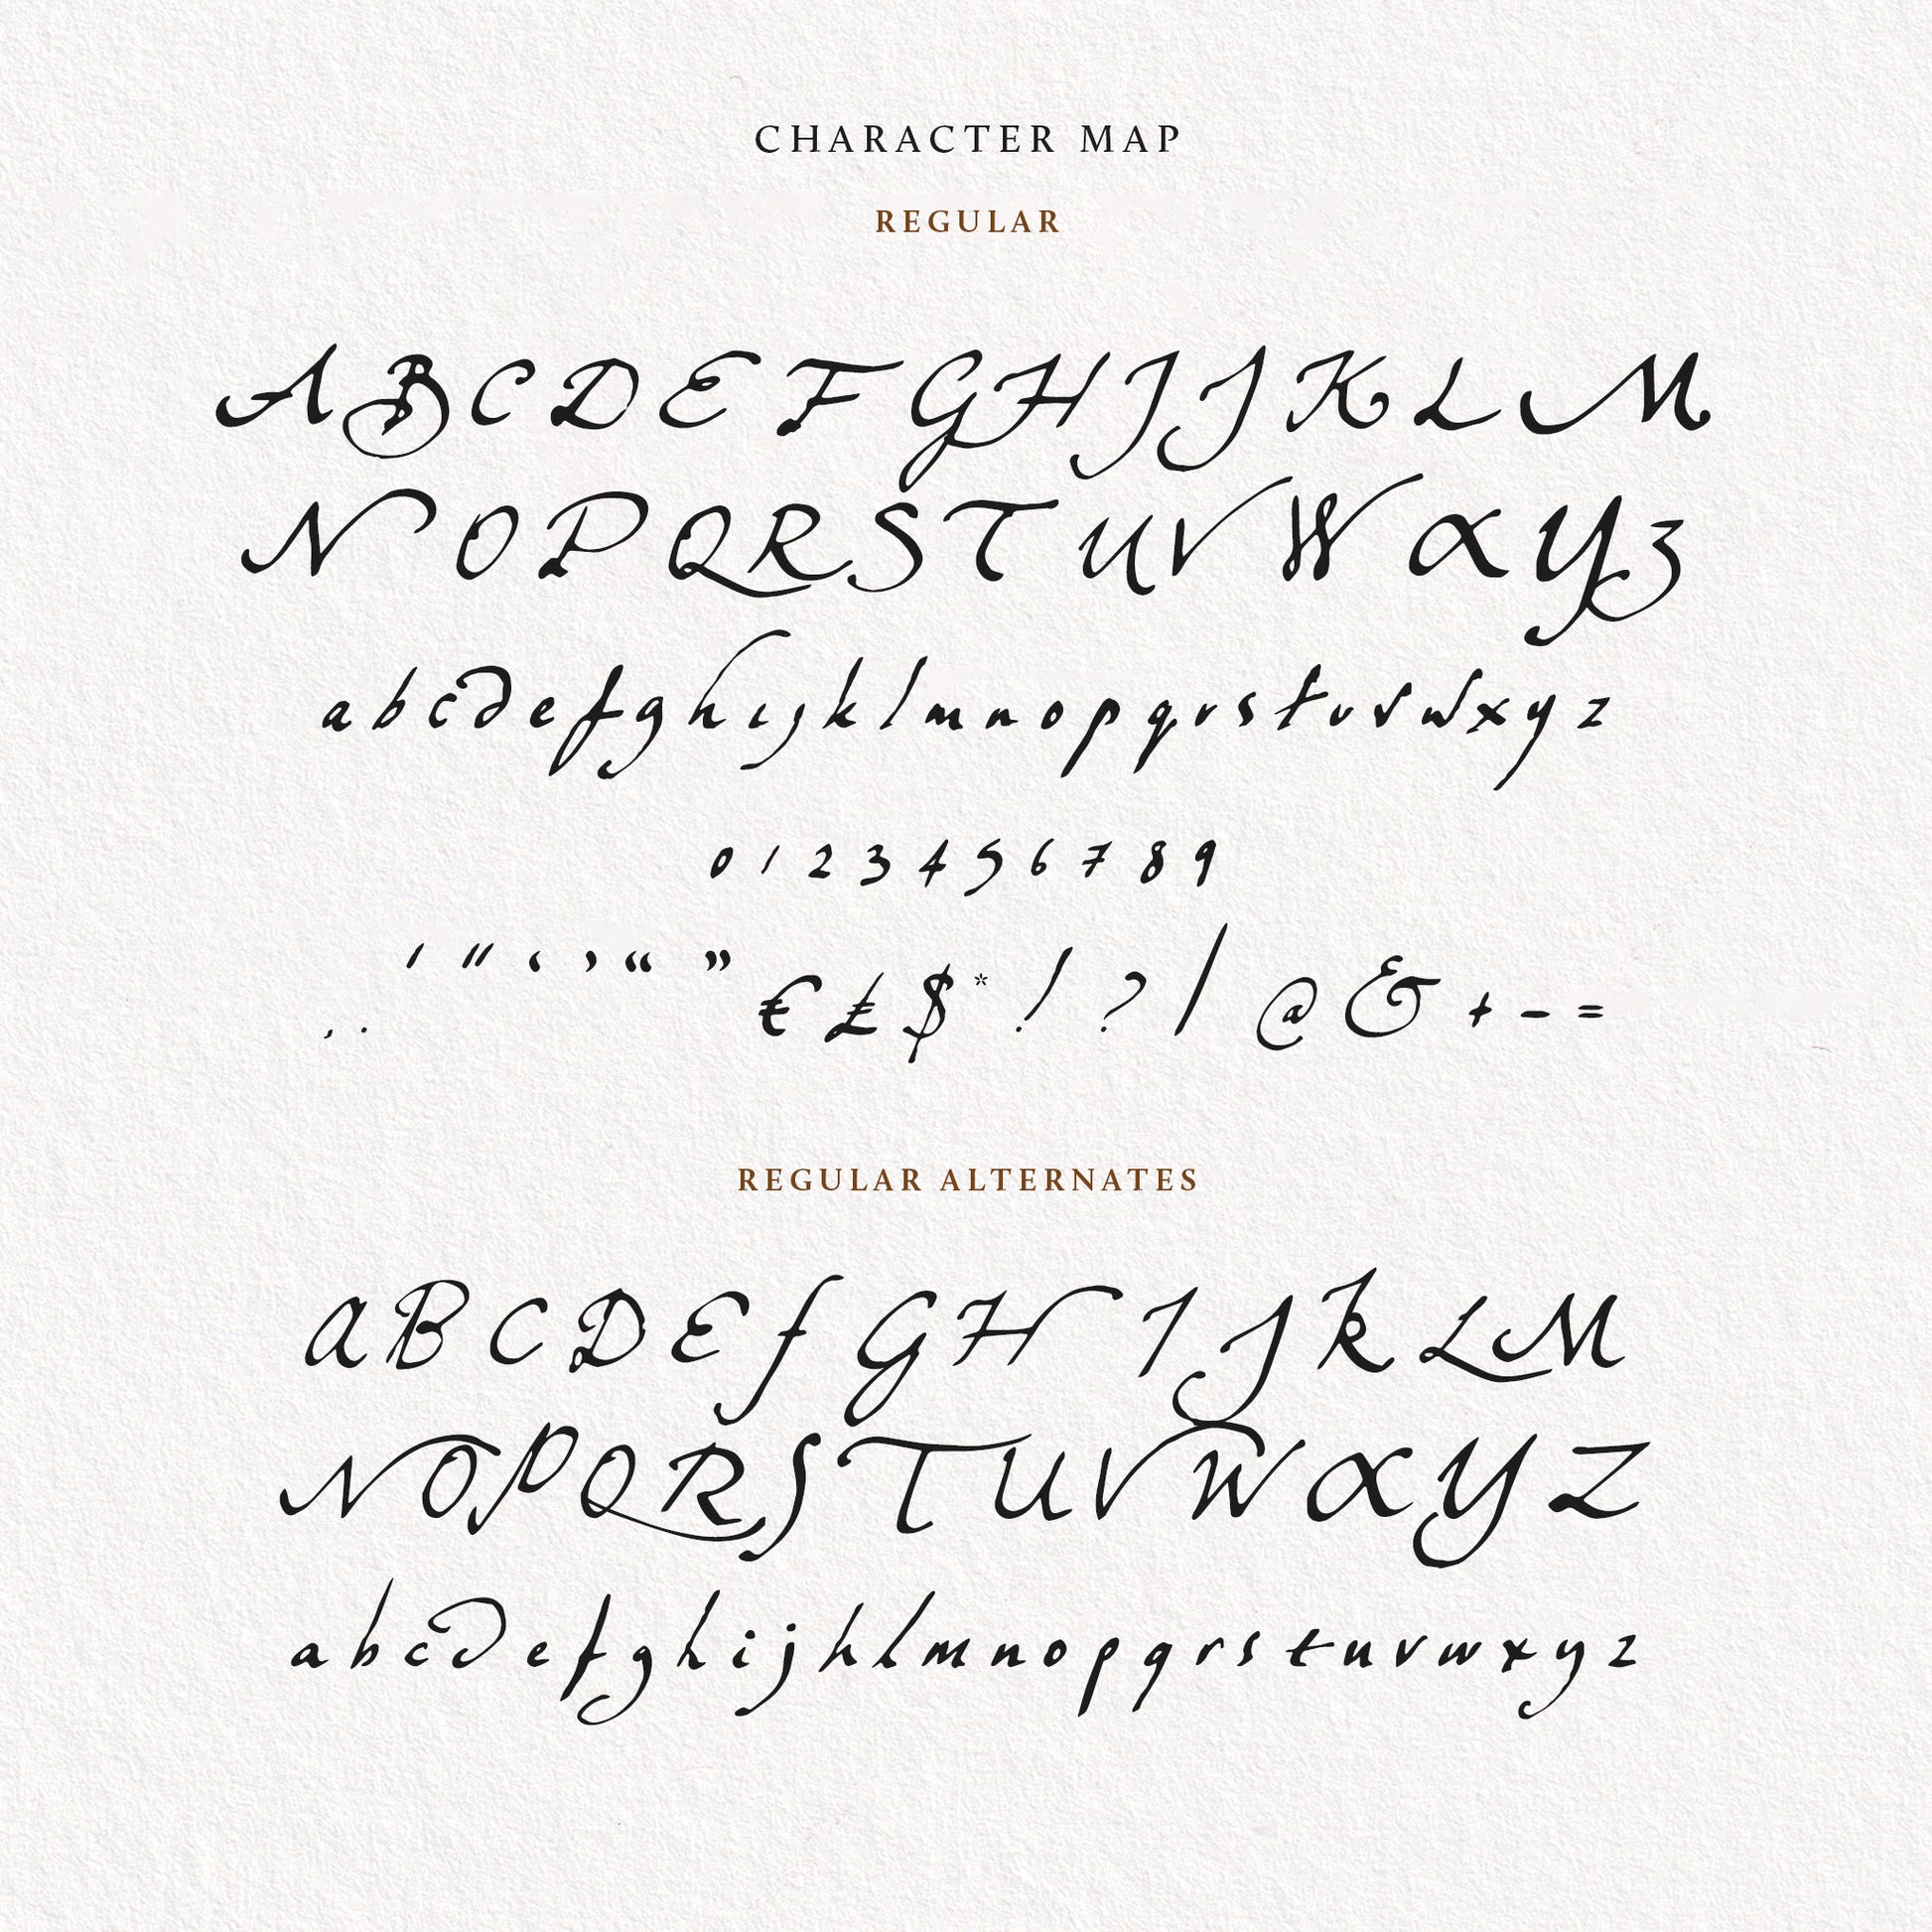 All characters of the Bliaunt script font on a paper background